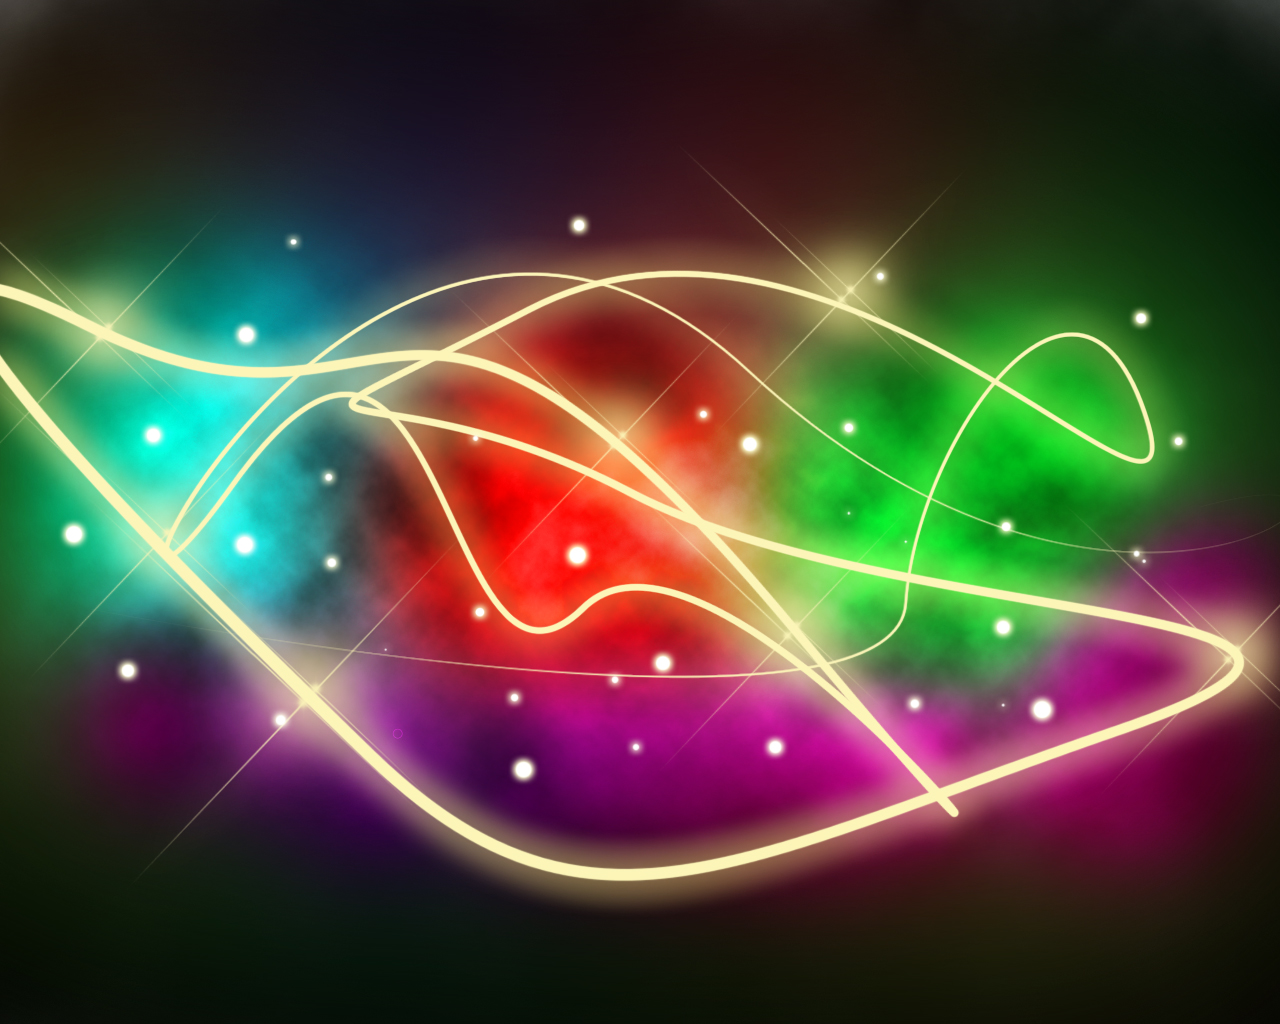 Download wallpaper abstract Colors with tags: Sparkles, Colorful, Macbook, Saturated